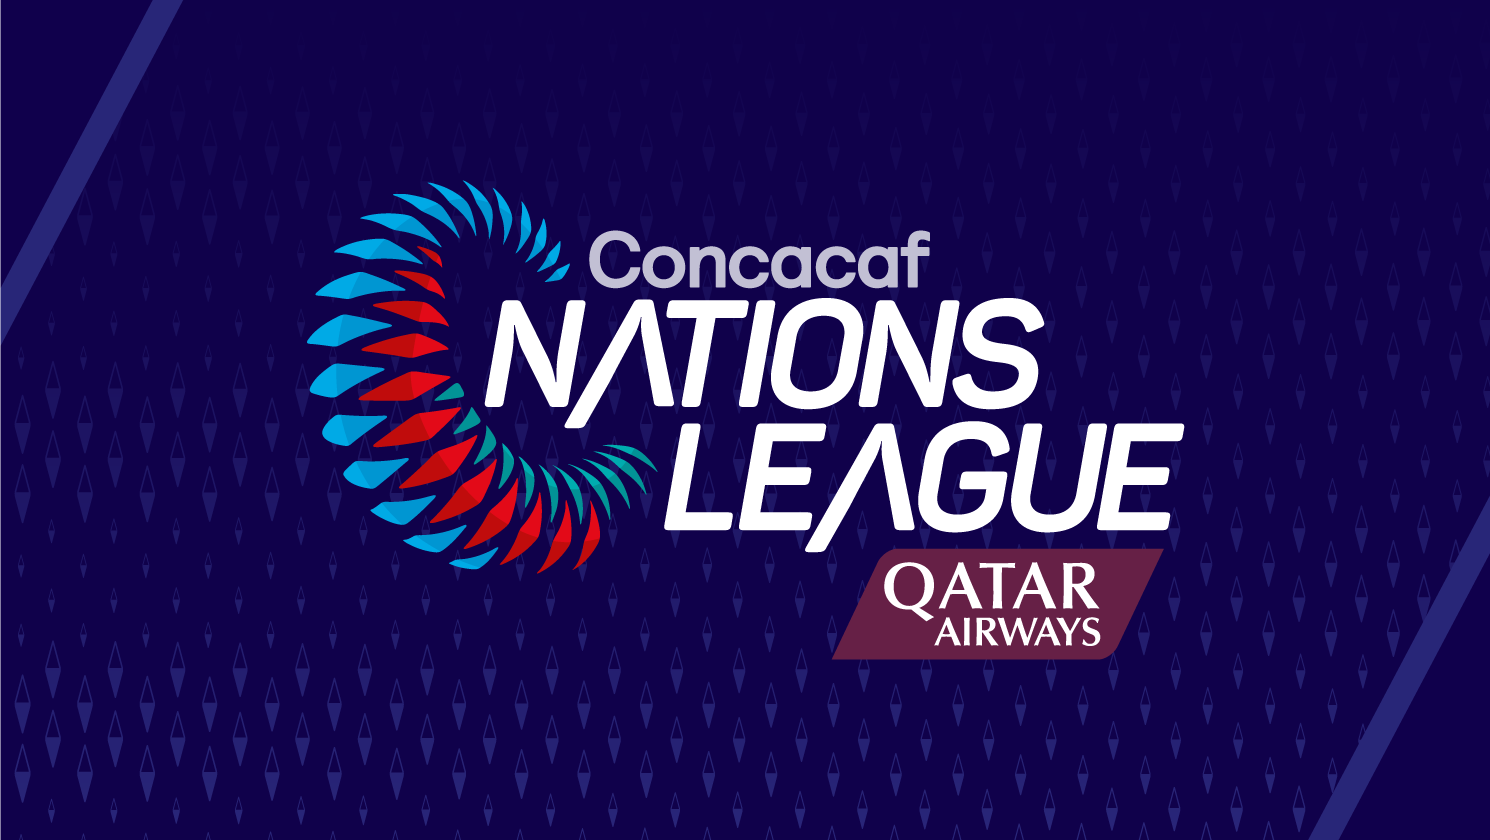 Where to Watch Concacaf Nations League